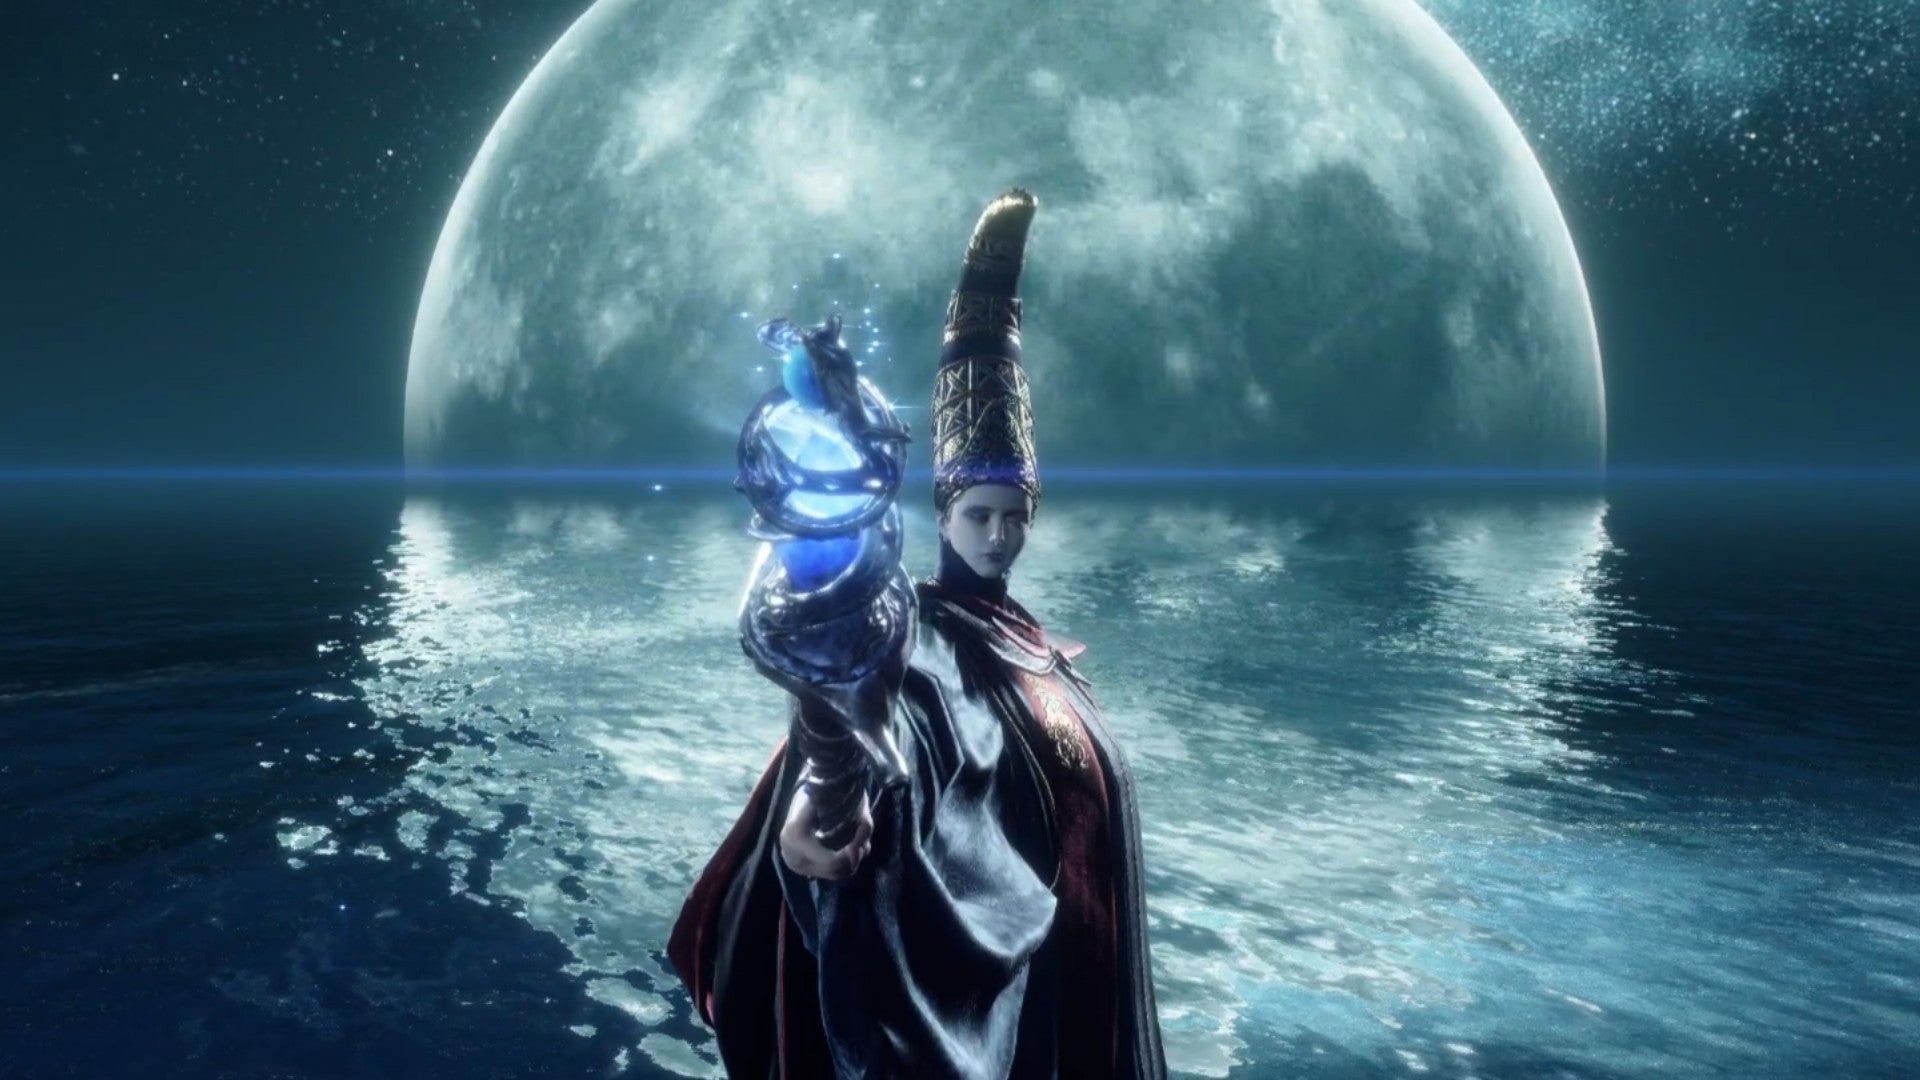 Elden Ring Queen of the Full Moon, Rennala, holds a glowing staff towards the screen as the moon hovers over an ocean in the background